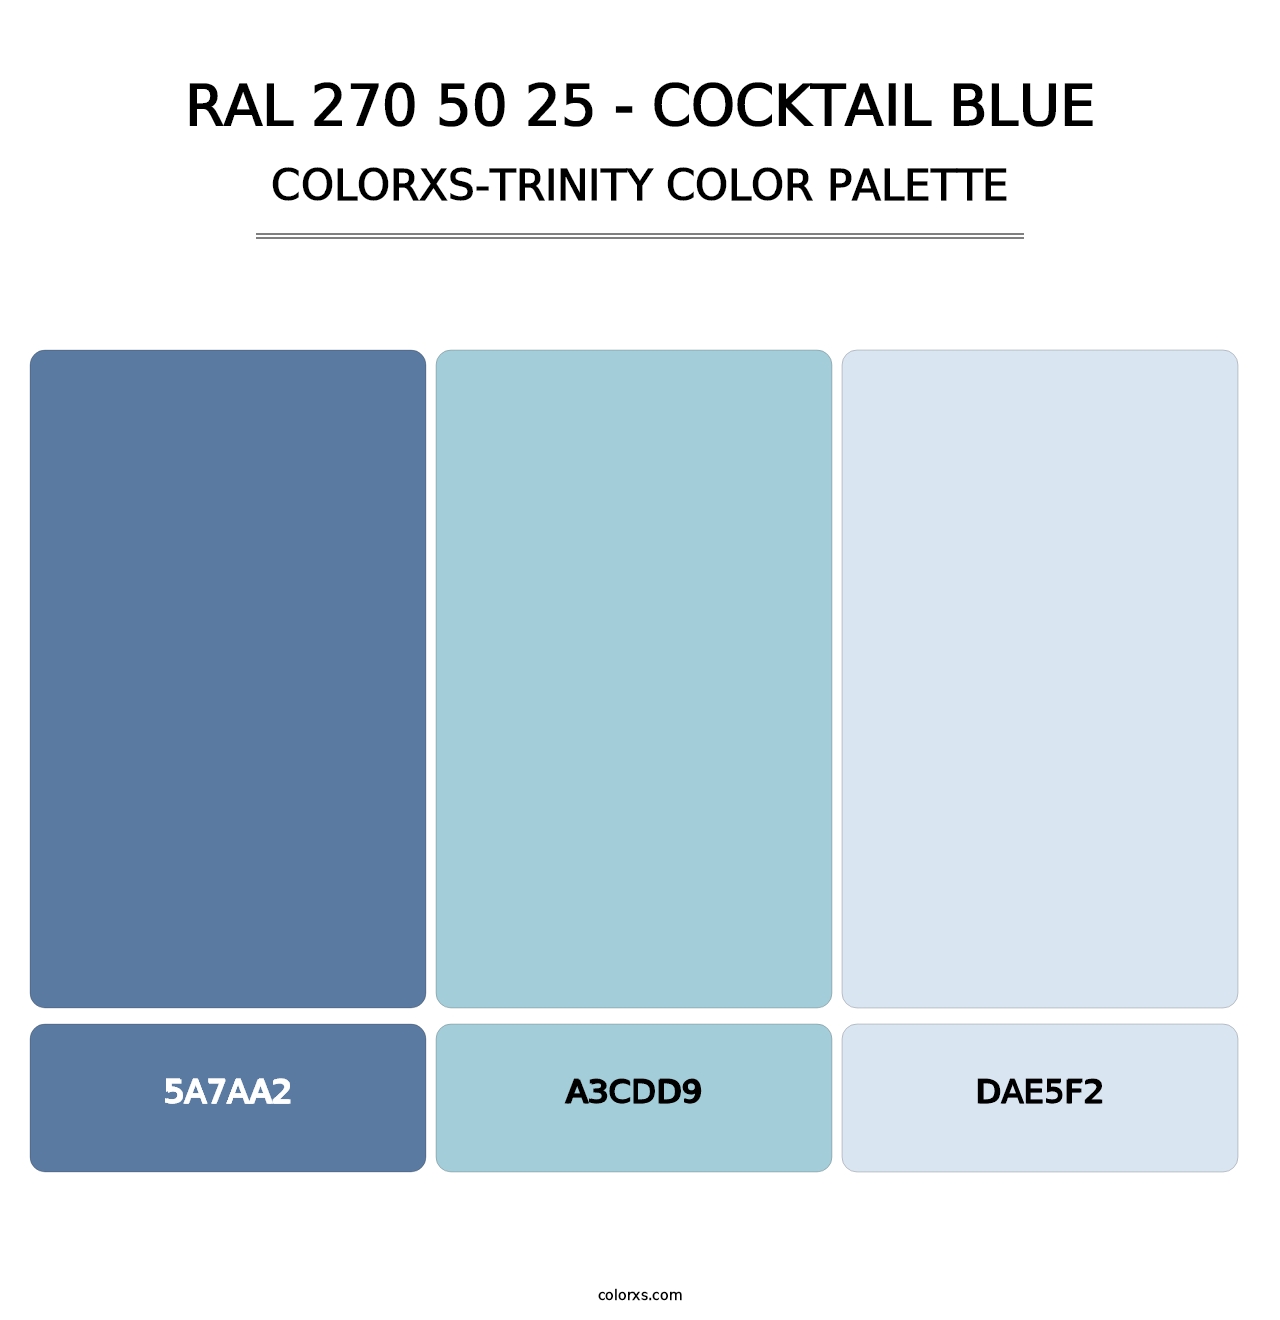 RAL 270 50 25 - Cocktail Blue - Colorxs Trinity Palette